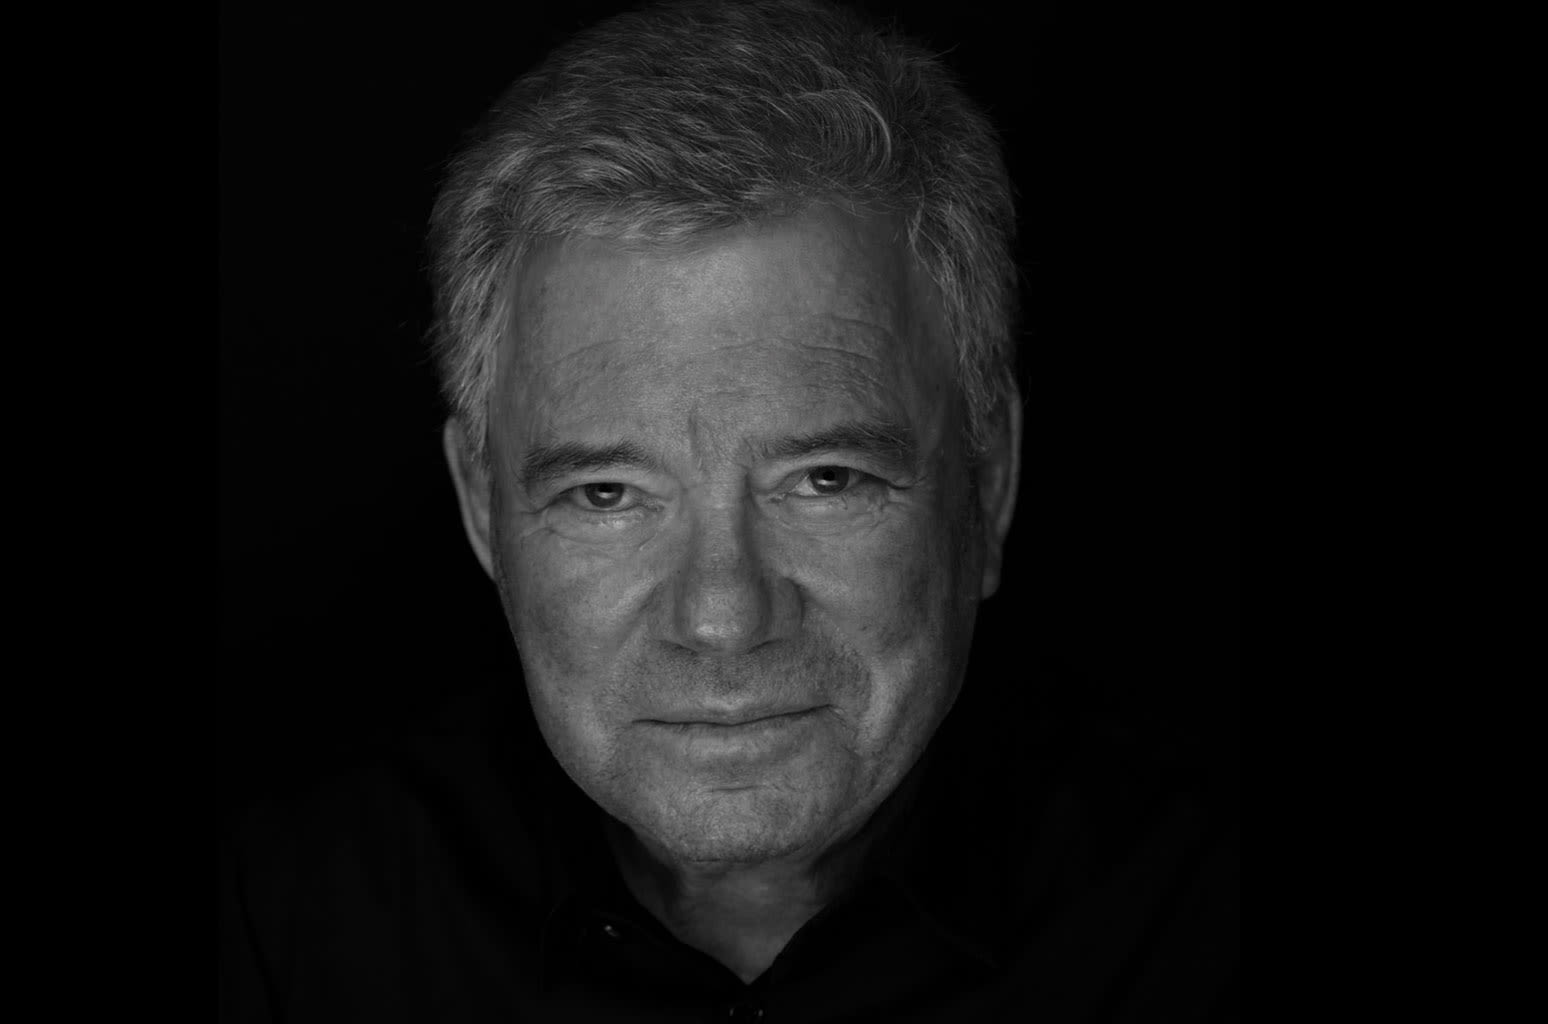 William Shatner Hopes His Ecological Children’s Album Inspires People to Wake Up to Climate Change